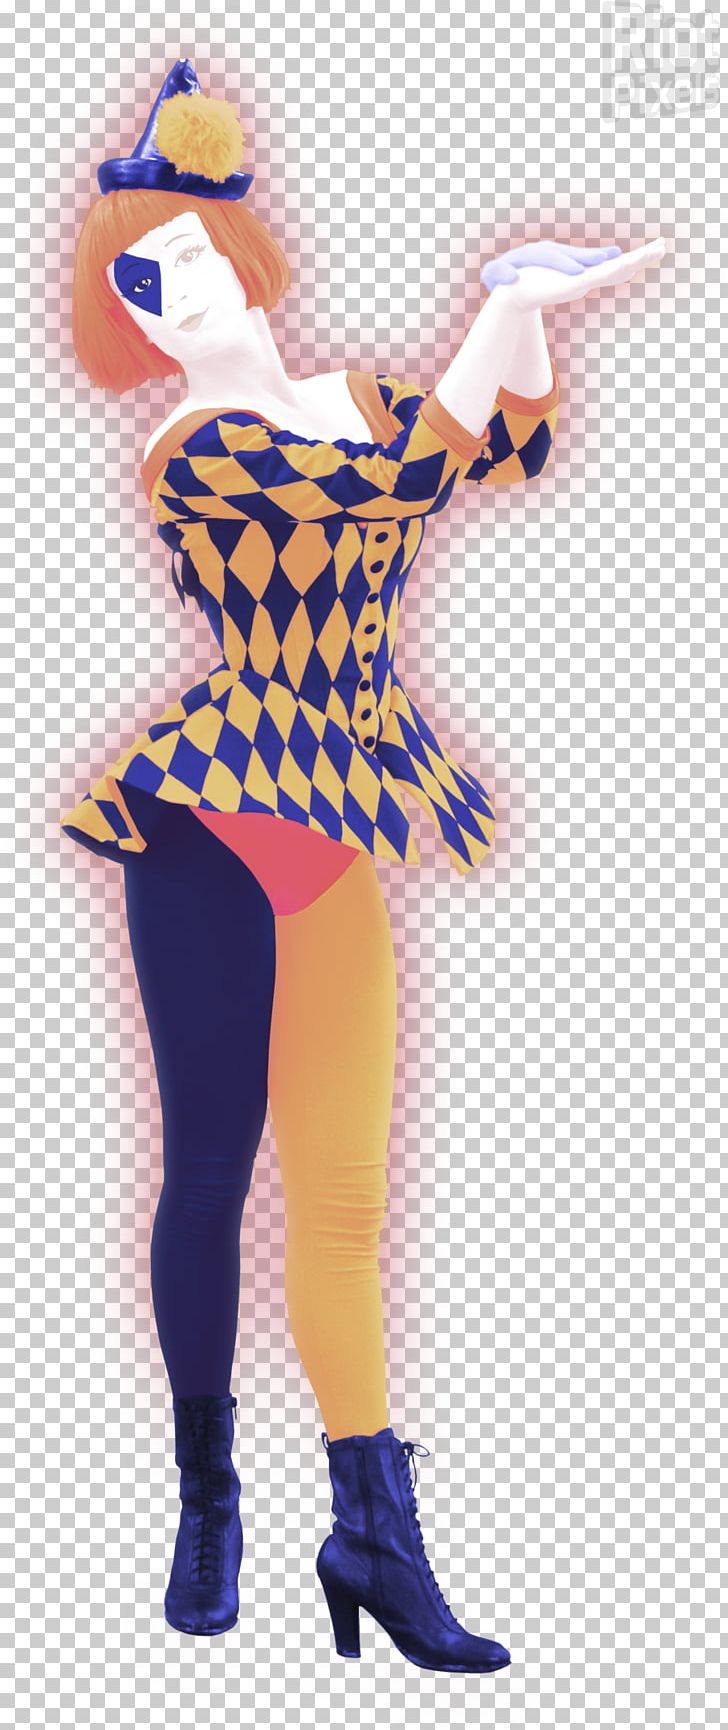 Just Dance 2016 Just Dance Kids Just Dance Now Circus PNG, Clipart, Circus, Costume, Costume Design, Dance, Figurine Free PNG Download